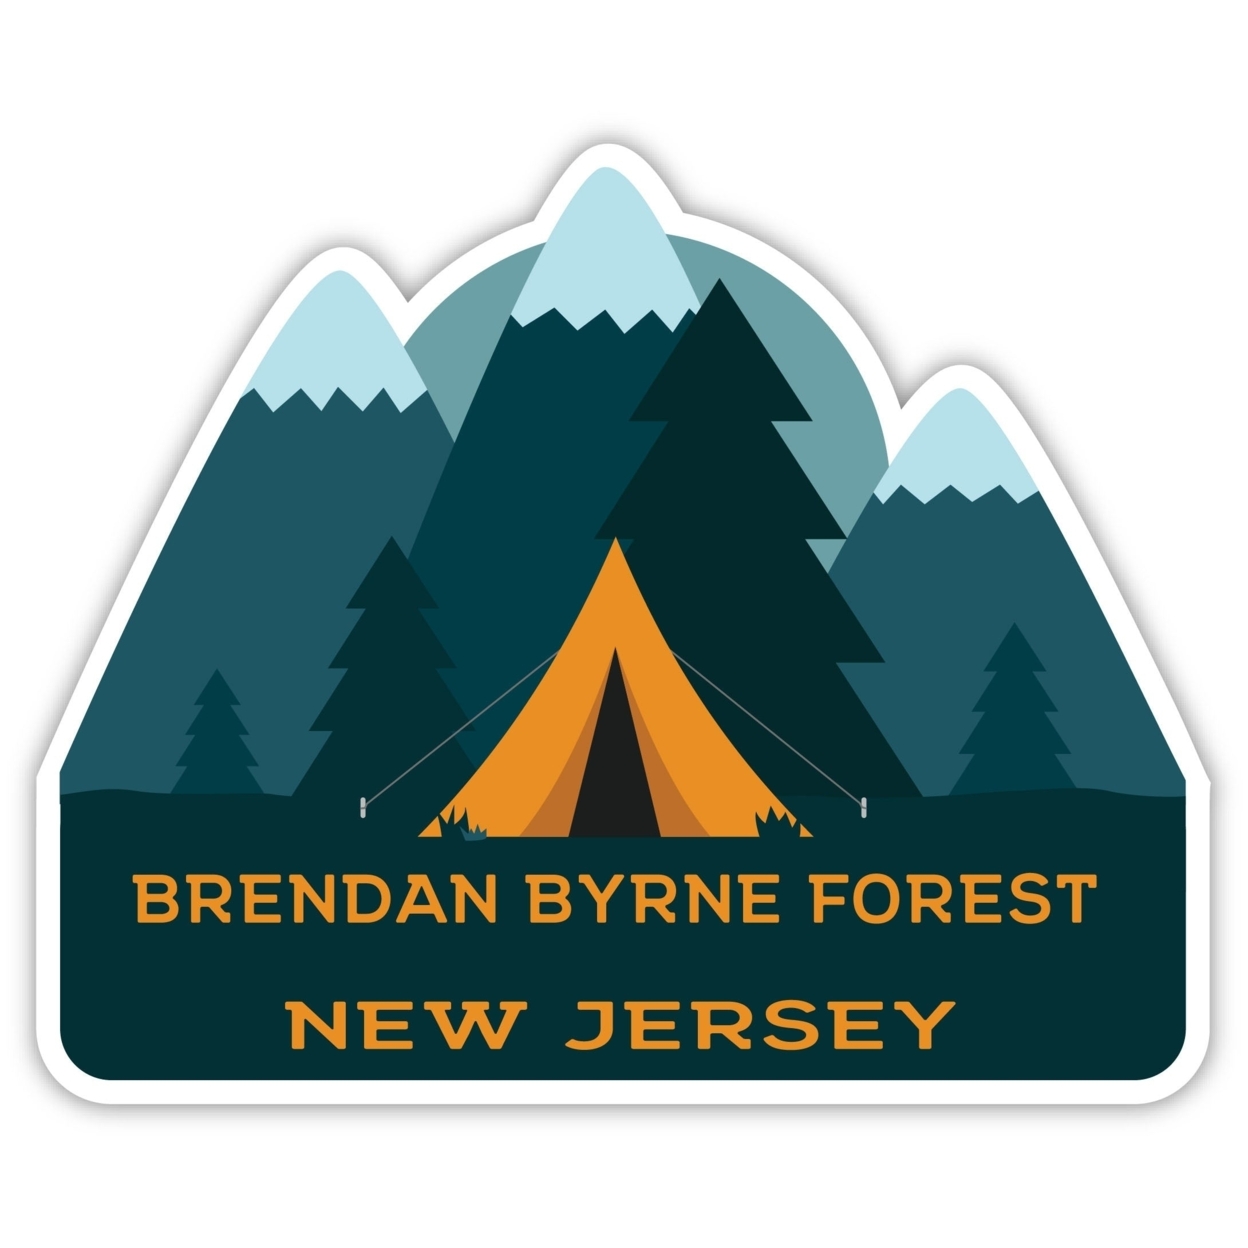 Brendan Byrne Forest New Jersey Souvenir Decorative Stickers (Choose Theme And Size) - Single Unit, 4-Inch, Tent